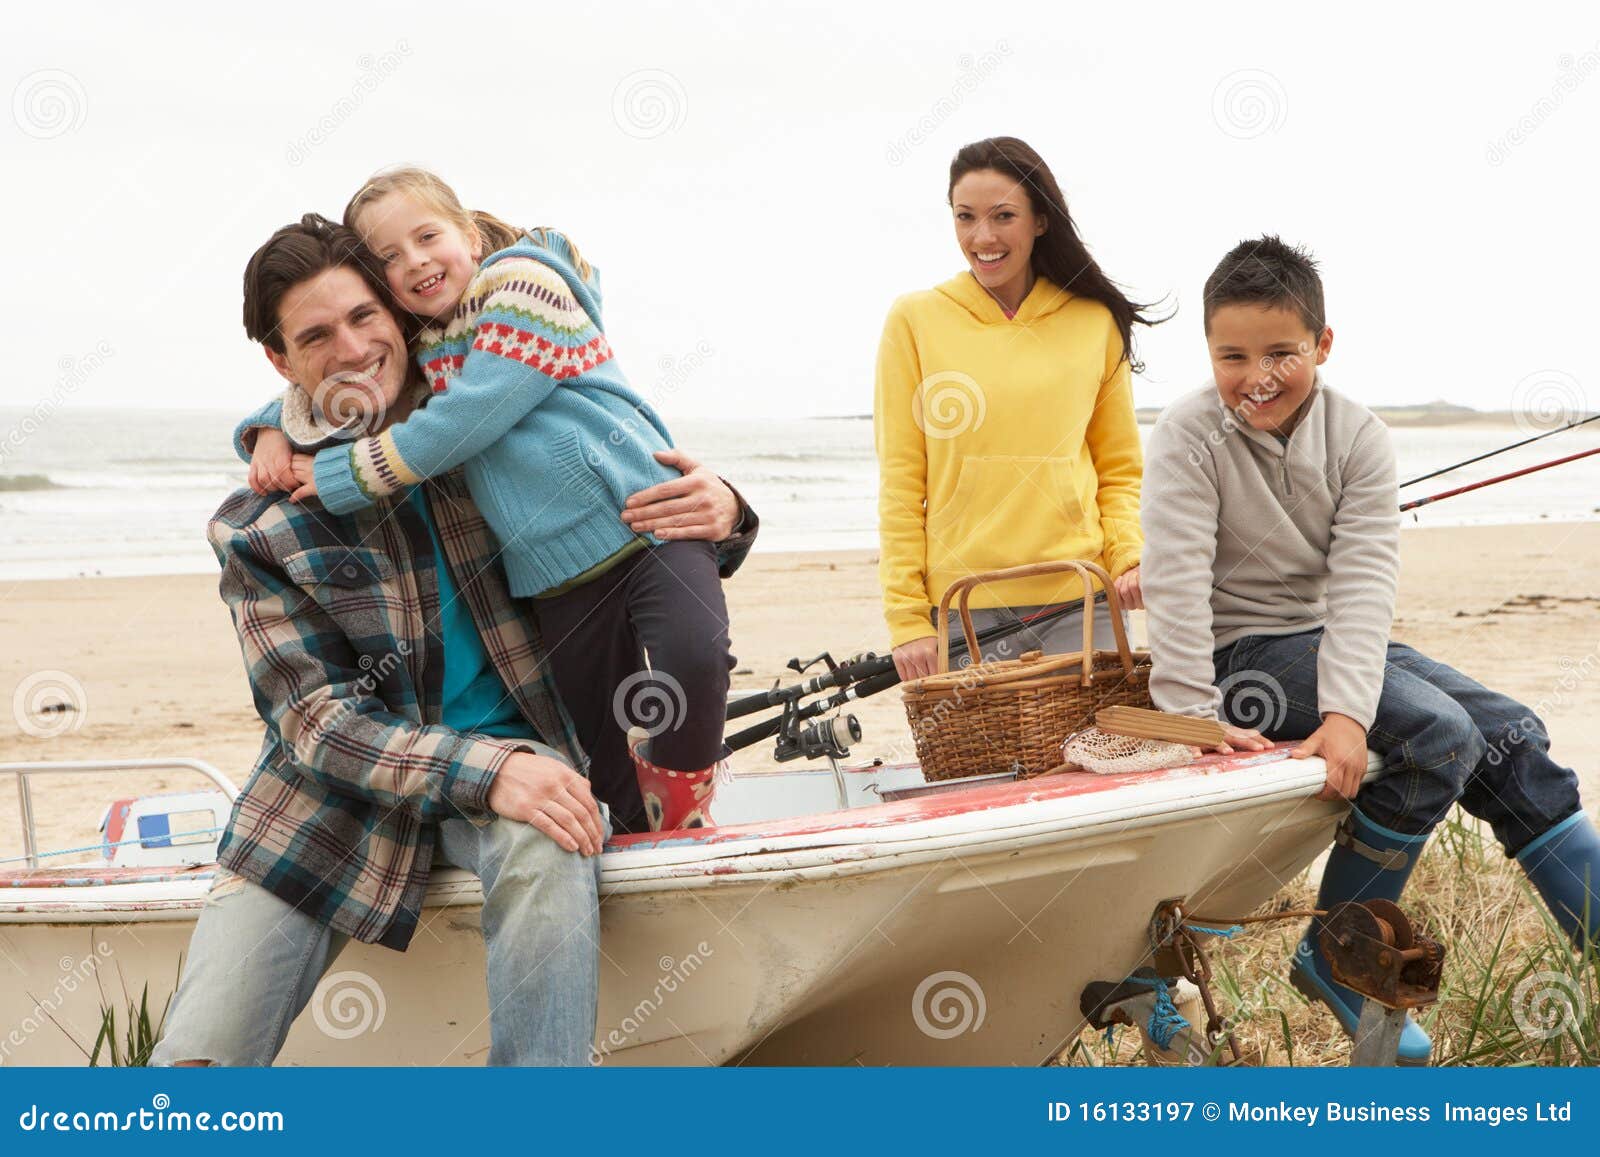 5,483 Family Fishing Boat Stock Photos - Free & Royalty-Free Stock Photos  from Dreamstime